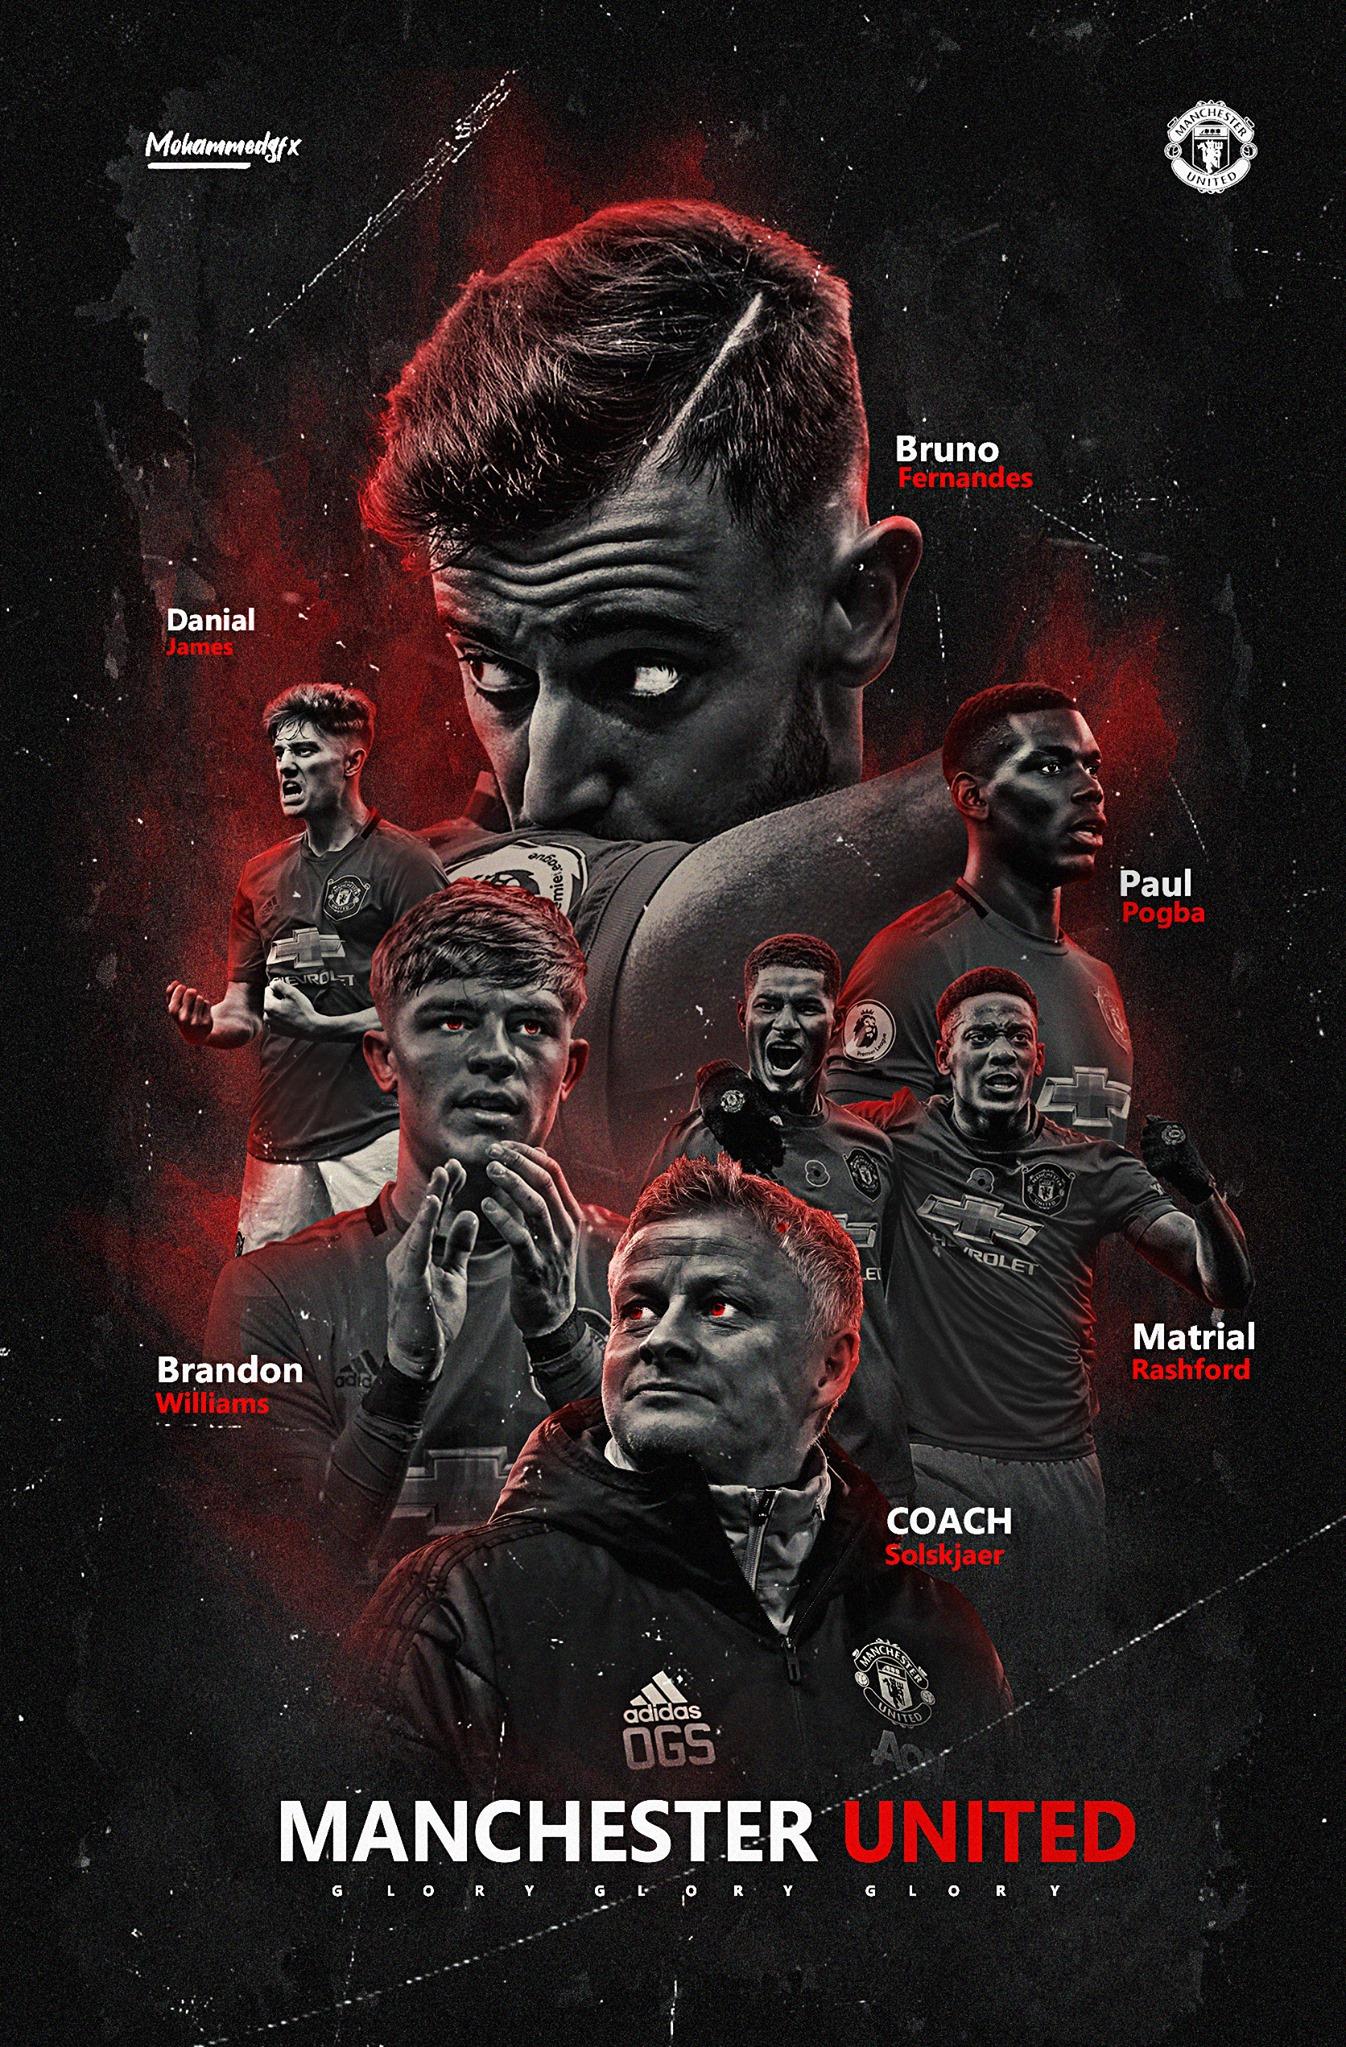 Mohammed Gfx Manchester United In Uefa Champions League Next